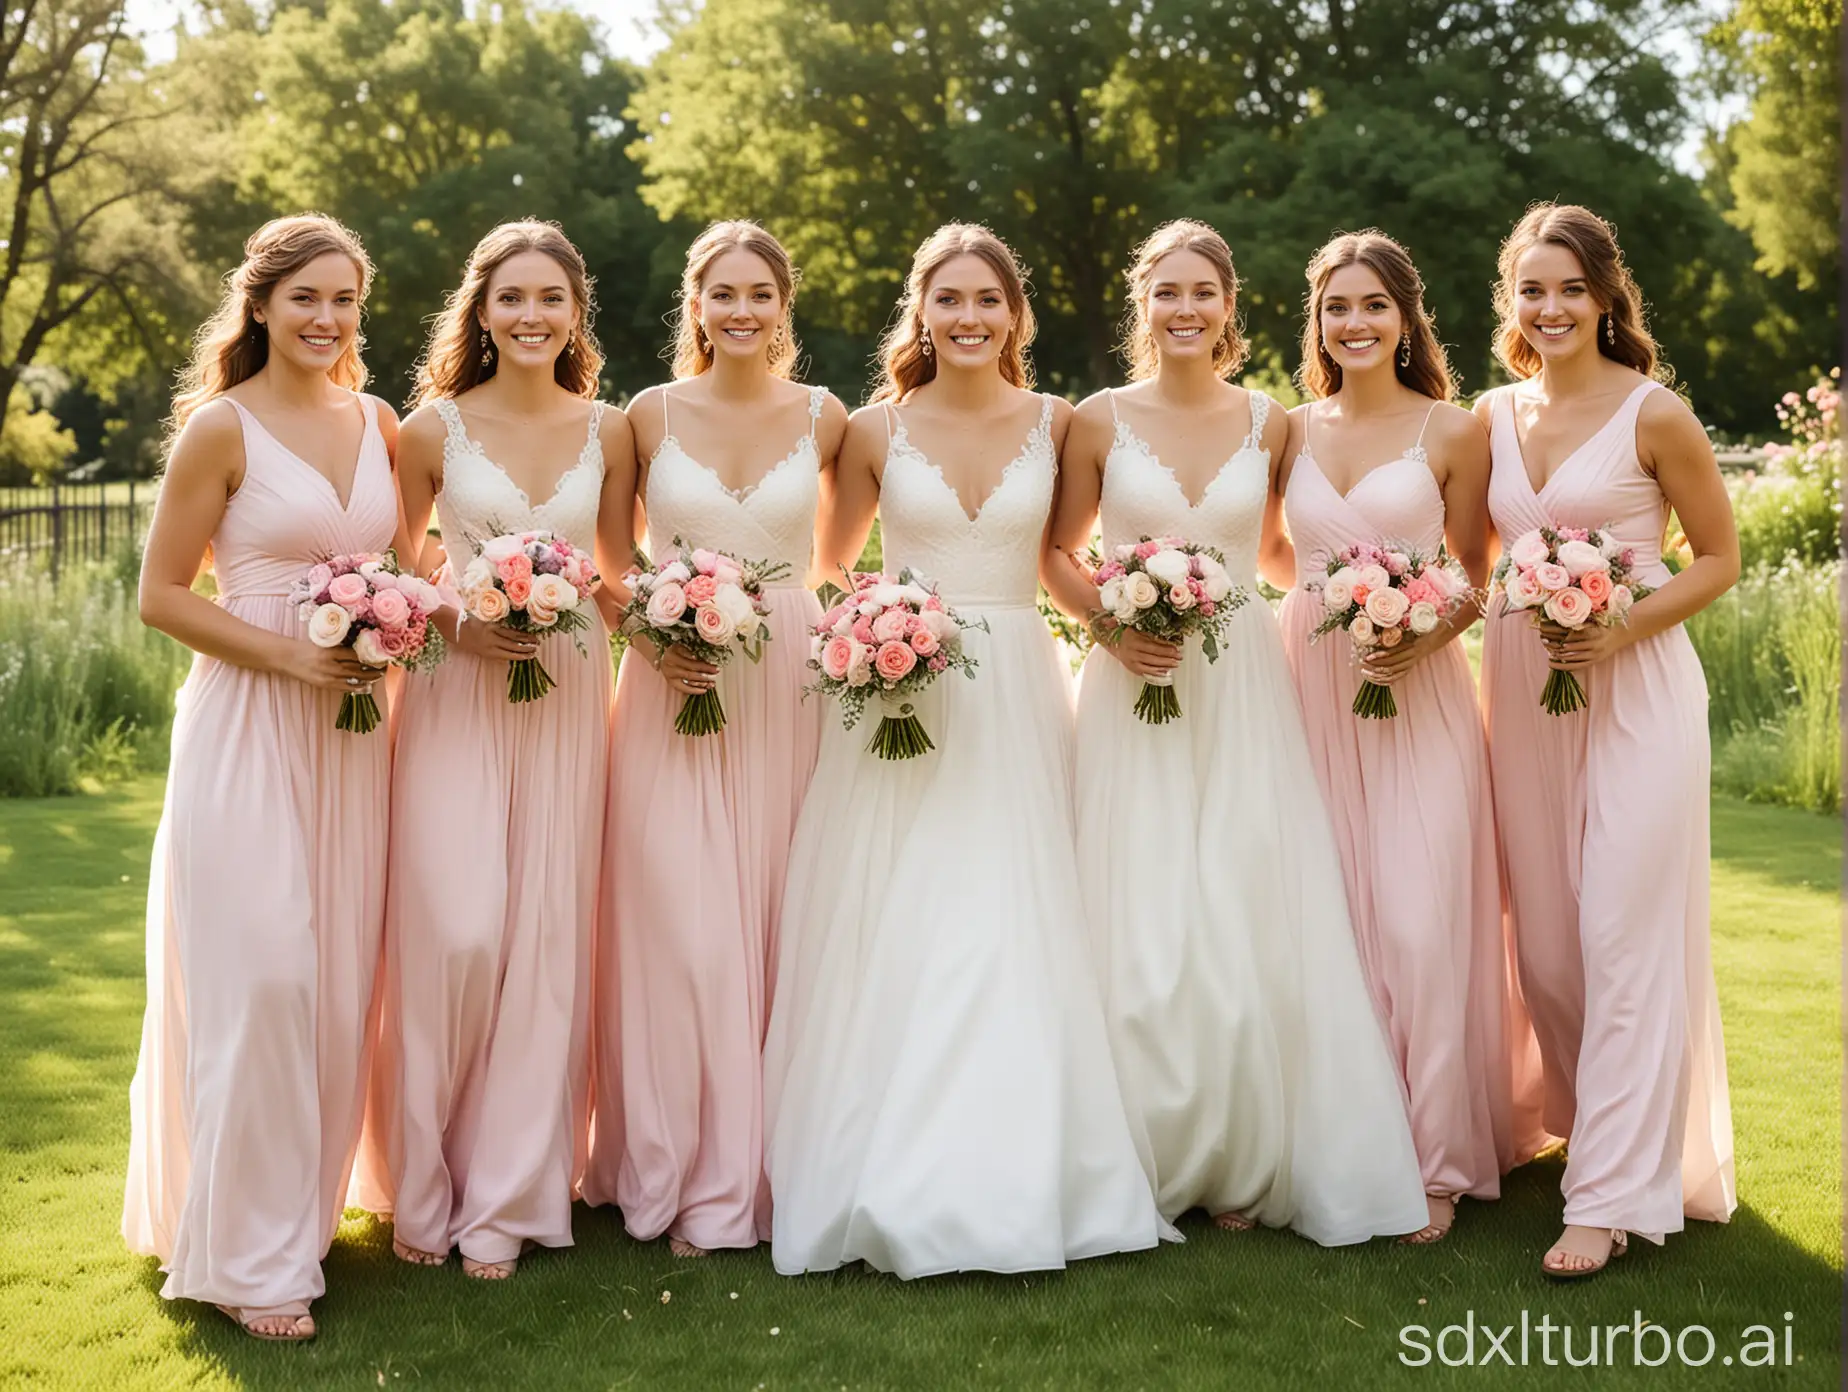 Five young American women are at a wedding, with the bride wearing a white wedding dress in the middle, smiling happily. The other four are bridesmaids wearing pink bridesmaid dresses, holding bouquets in their hands, with joyful and bright expressions. Each person's face should be distinctive, with relaxed posture. The background is grassy, sunny, well-focused, and high-quality.